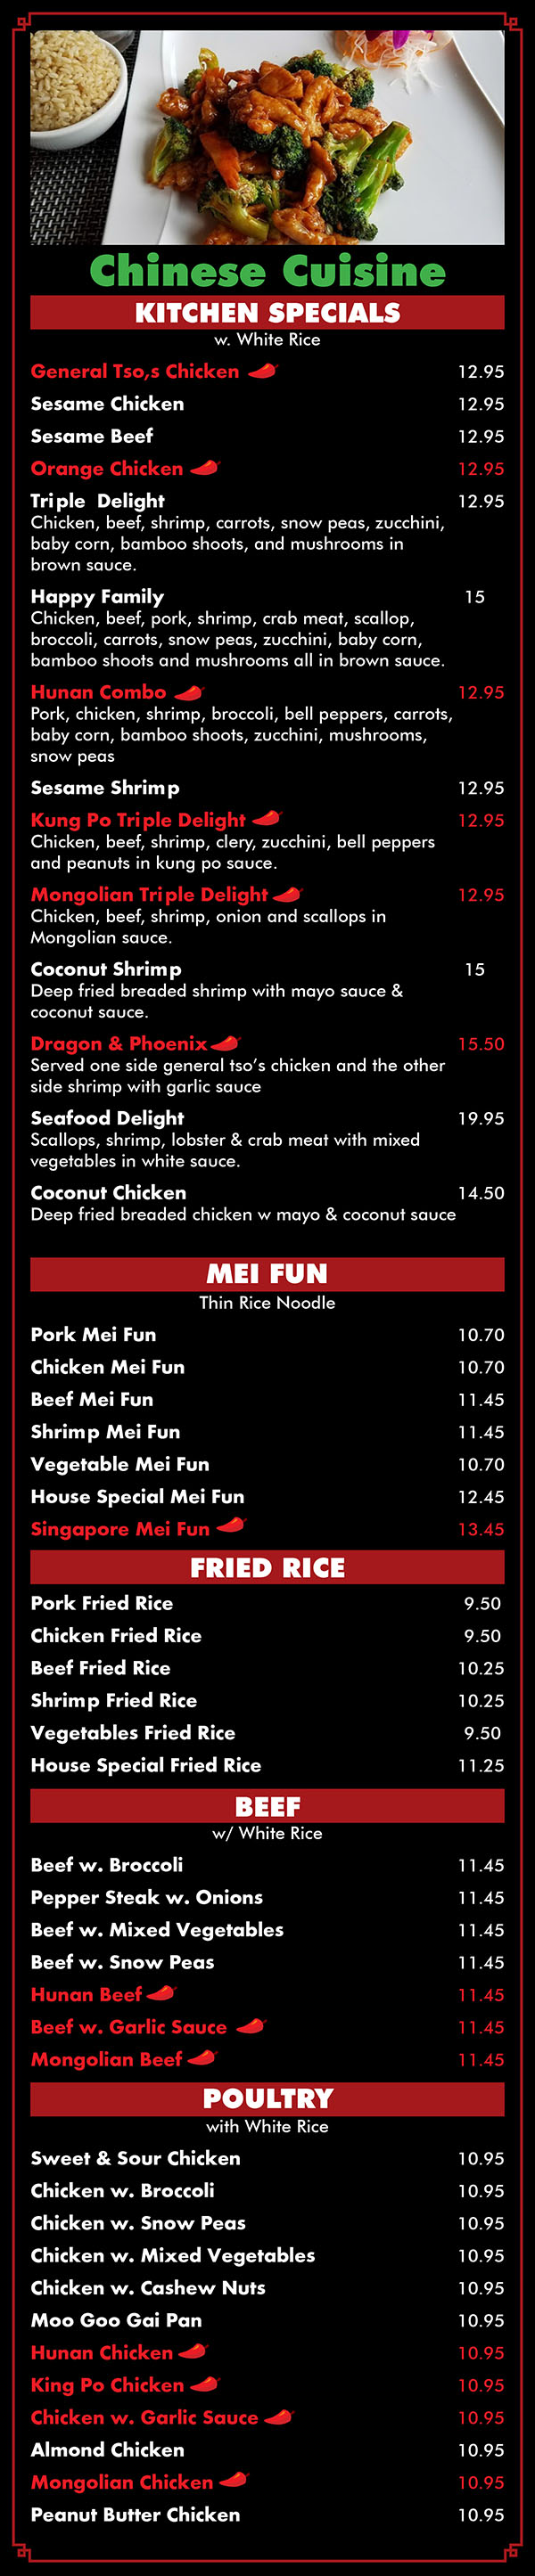 Asian Fusion Restaurant Menu Lincoln NE - Page 4
KITCHEN SPECIAL On White Rice) 
K 1General Tso's Chicken 
K 2. Sesame Chicken 
K 3. Sesame Beef 
K 4.k Orange Chicken 
K 5. Triple Delight Chicken, beef, shrimp, carrots, snow peas, zucchini, baby corn, bamboo shoots, and mushrooms in brown sauce. 
K 6. Sweet & Sour Delight 11.5 
K 7. Happy Family 12.5 Chicken, beef, pork, shrimp, crab meat, scallop, broccoli, carrots, snow peas, zucchini , baby corn, bamboo shoots and mushrooms all in brown sauce. 
K 8.k Hunan Combo 11.5 Pork, chicken, shrimp, broccoli, bell peppers, carrots, baby corn, bamboo shoots, zucchini, mushrooms, snow peas and cabbage in all brown sauce. 
K 9. Sesame Shrimp 11.5 
K10. k. Kung Po Triple Delight 11.5 Chicken, beef, shrimp, celery, zucchini, bell peppers and peanuts in kung po sauce 
K11.k. Mongolian Triple Delight 11.5 Chicken, beef, shrimp, onion and scallops in Mongolian sauce 
K12. Coconut Shrimp 12.5 Deep fried breaded shrimp w. mayo sauce & coconut sauce. 
K13. k, Dragon & Phoenix 15 Served one side general tso's chicken and the other side shrimp w. garlic sauce 
K14. Four Seasons 12.5 Pork, chicken, beef, shrimp, carrots, snow peas, zucchini, baby corn, bamboo shoots and mushrooms in brown sauce 
K15. Seafood Delight 18 Scallops, squid, shrimp, lobster & crab meat w. mixed vegetables in white sauce. 

MEI FUN (Thin Rice Noodle) Order 
65. Pork Mei Fun 
66. Chicken Mei Fun 
67. Beef Mei Fun 
68. Shrimp Mei Fun 
69. Vegetable Mei Fun 
70. House Special Mei Fun 
71. k. Singapore Mei Fun 
9.25 9.25 10 10 9.25 11 12 

FRIED RICE 
Order 
72. Pork Fried Rice 
73. Chicken Fried Rice 
74. Beef Fried Rice 
75. Shrimp Fried Rice 
76. Vegetable Fried Rice 
77. House Special Fried Rice 
